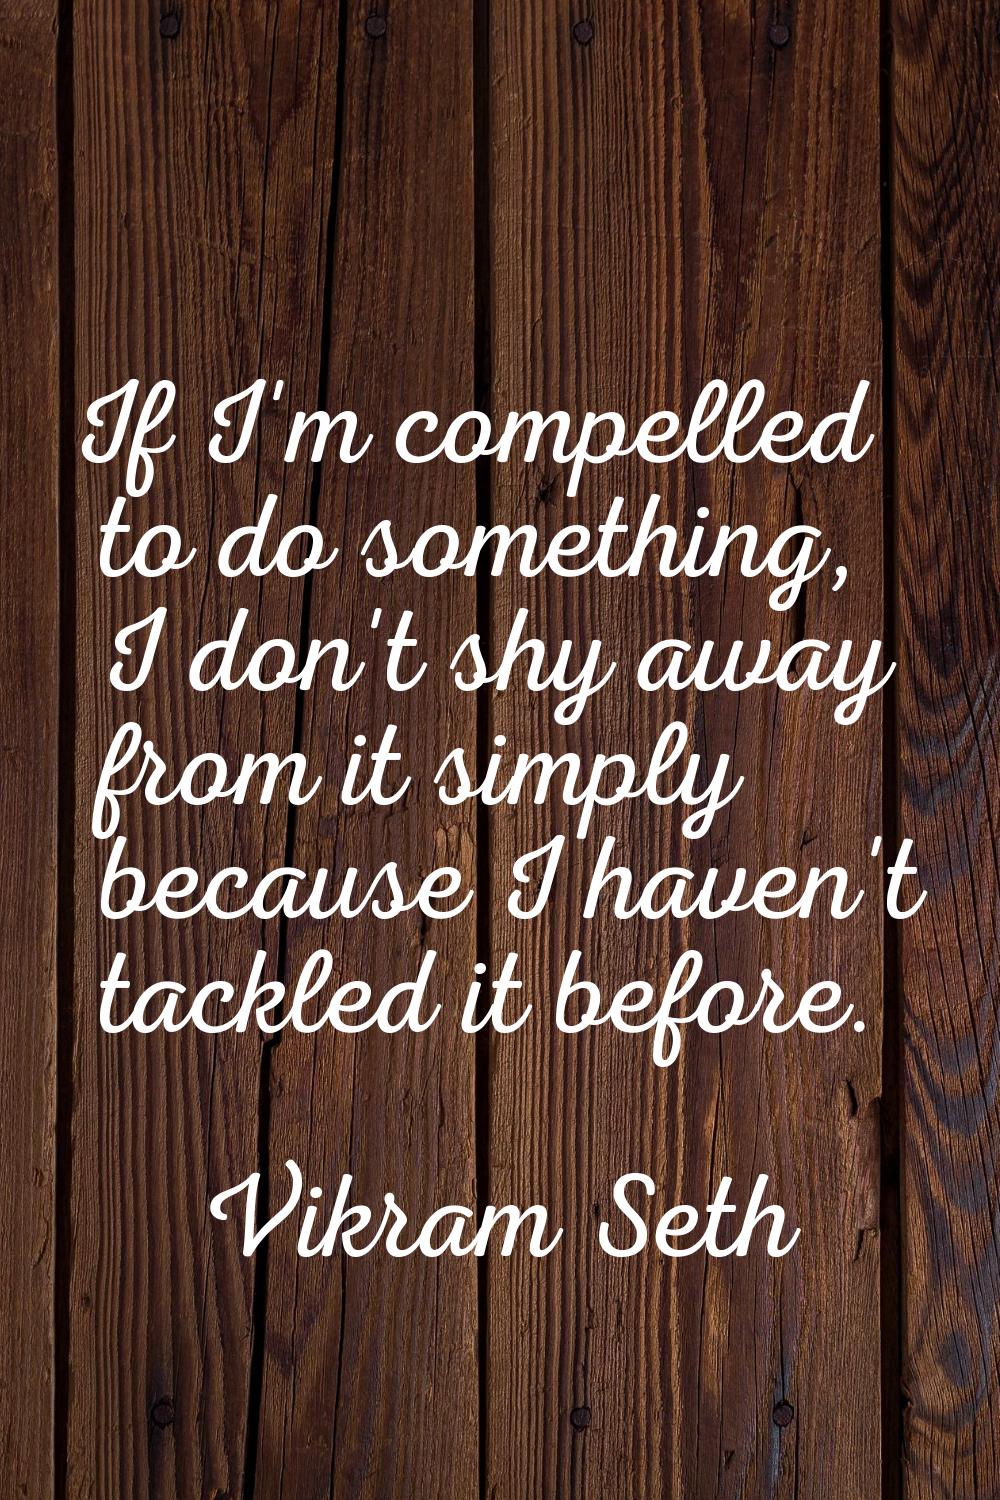 If I'm compelled to do something, I don't shy away from it simply because I haven't tackled it befo